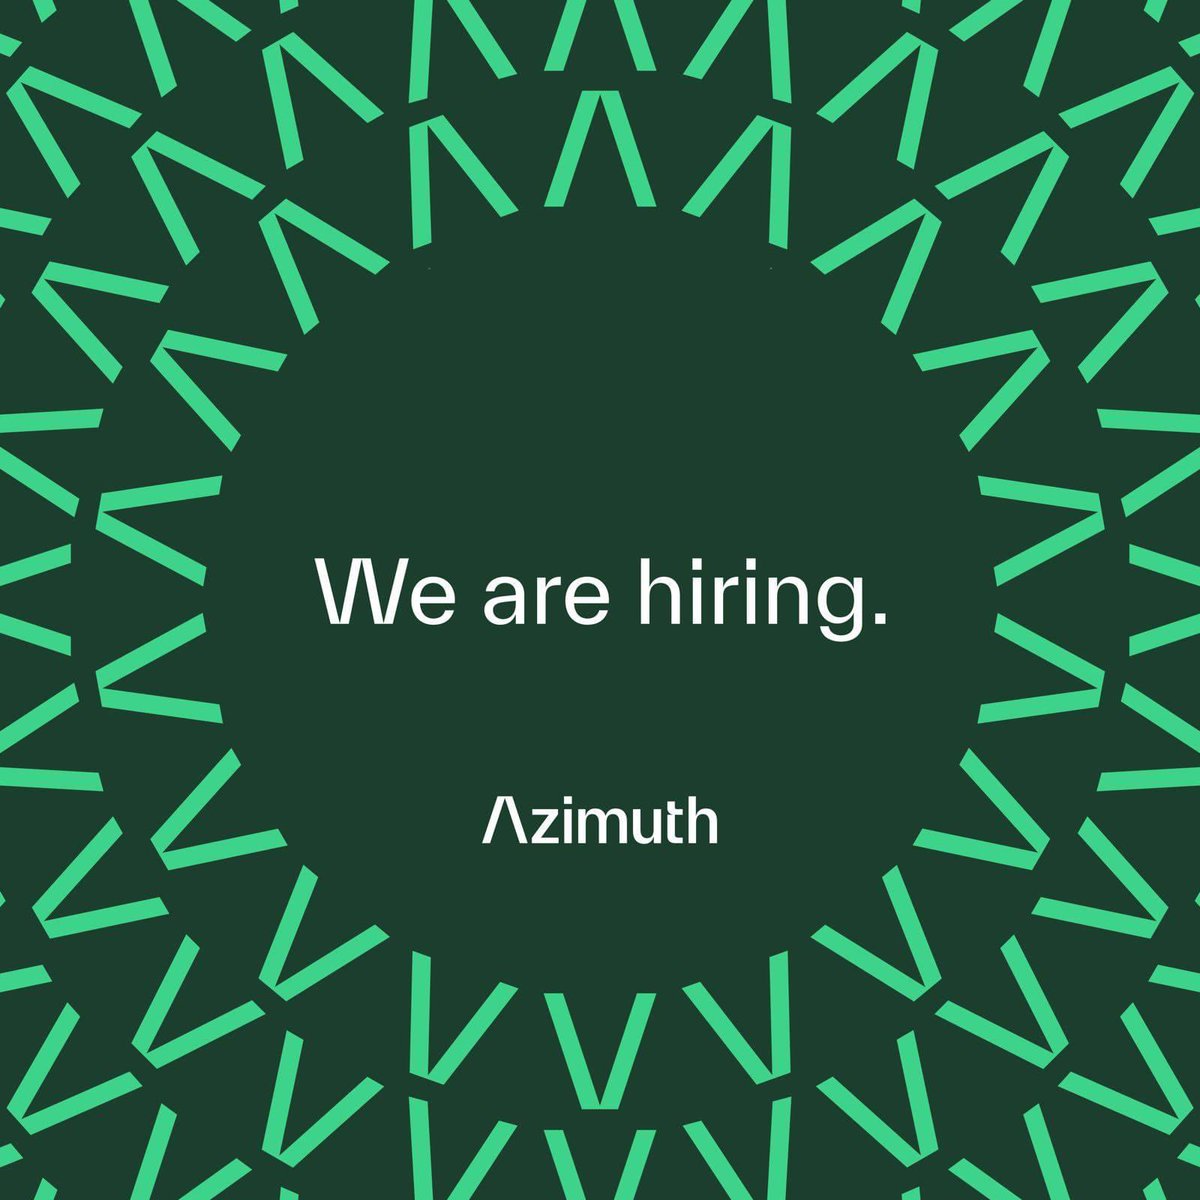 Azimuth post house are looking for enthusiastic RUNNERS who can engage with clients, manage admin tasks, and maintain their  vibrant atmosphere. Enjoy training opportunities, and great perks! Reach out to FOH@azimuth.tv for more info . 
.
.
.
#tvjobs #filmjobs #commercials